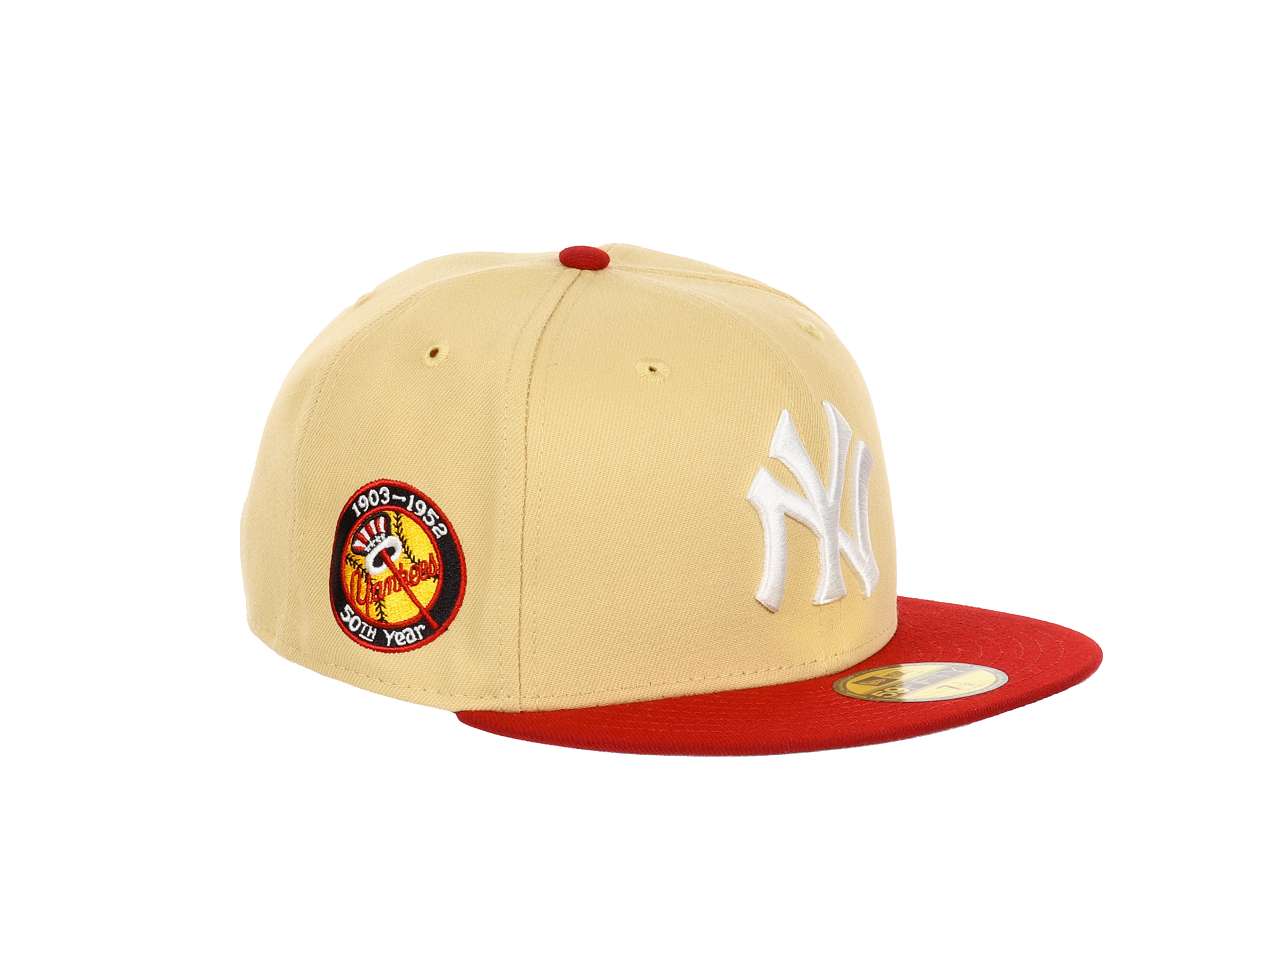 New York Yankees MLB 50th Year Sidepatch Vegas Gold Red 59Fifty Basecap New Era